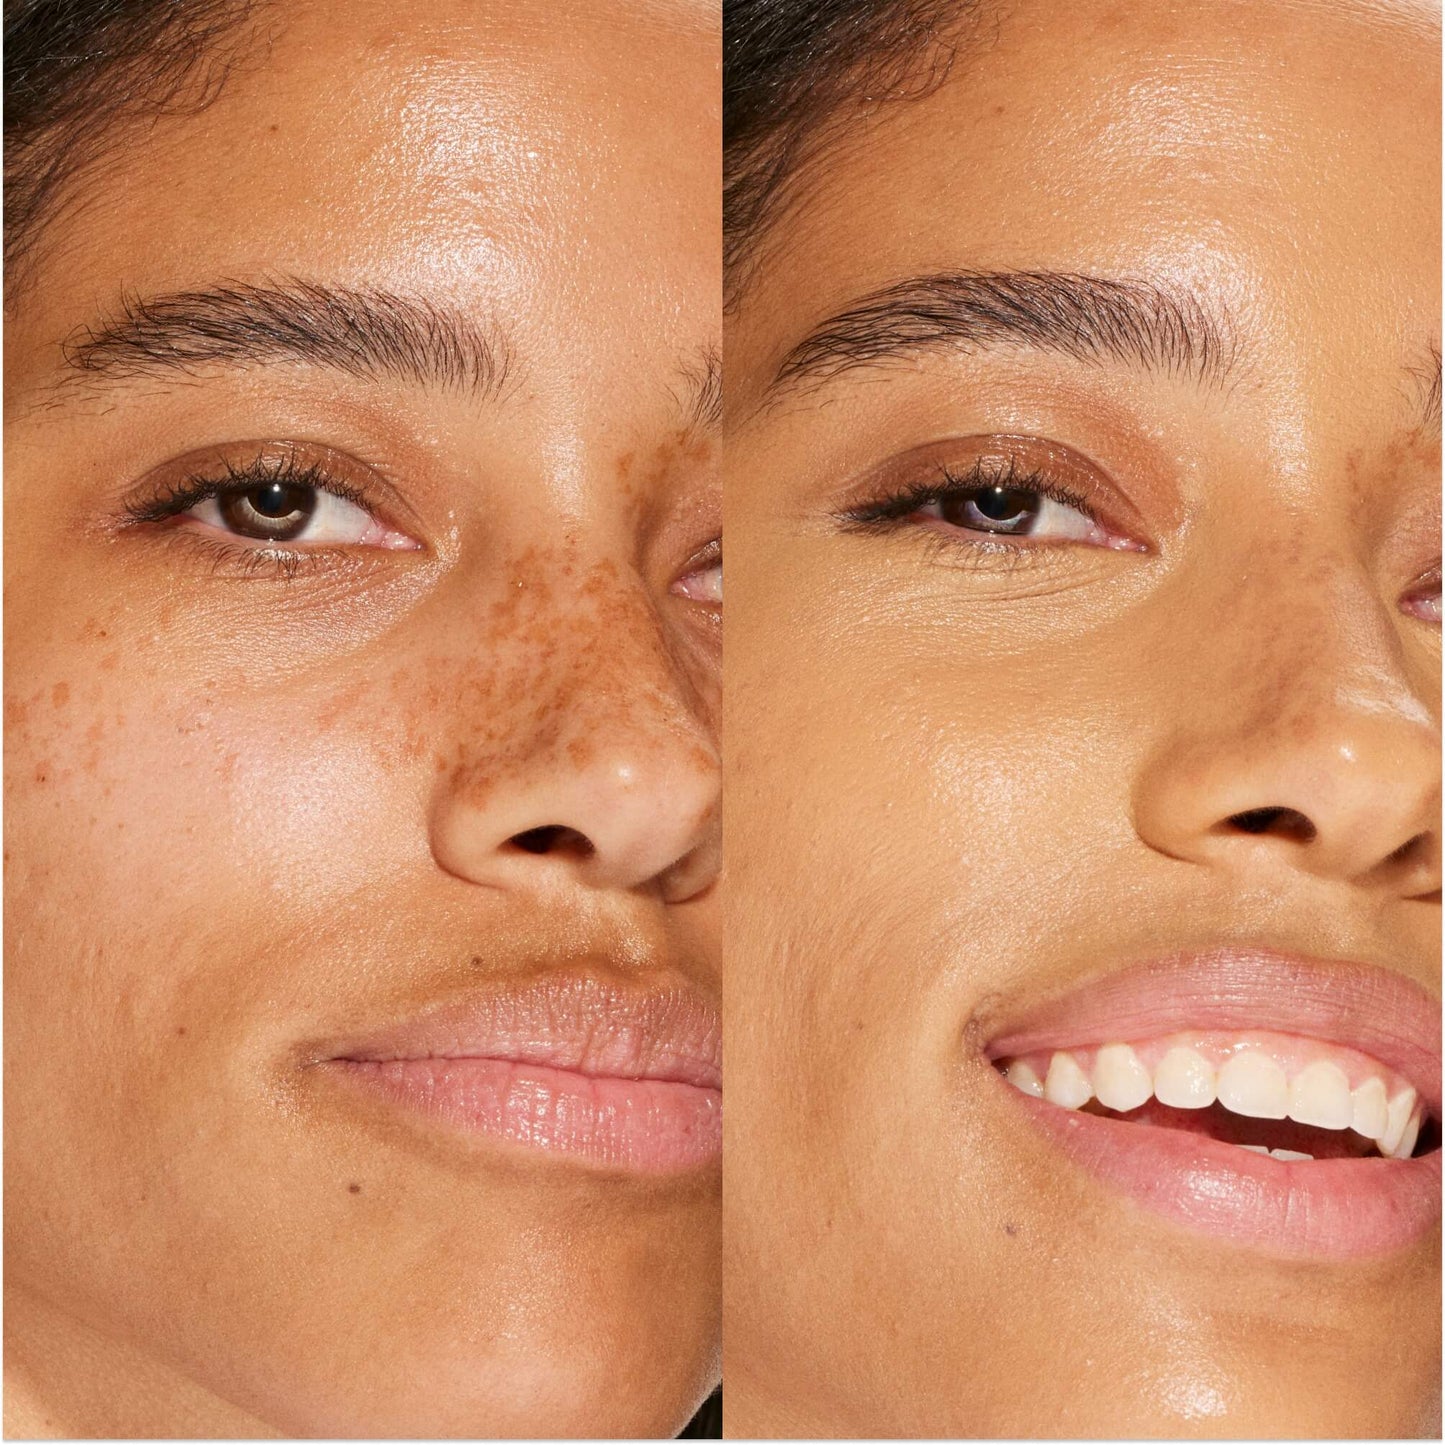 13.0 PLAYA [A person's face before and after using Tower 28 Beauty's Swipe Serum Concealer in shade 13.0 PLAYA to cover up dark circles, blemishes, and discoloration]